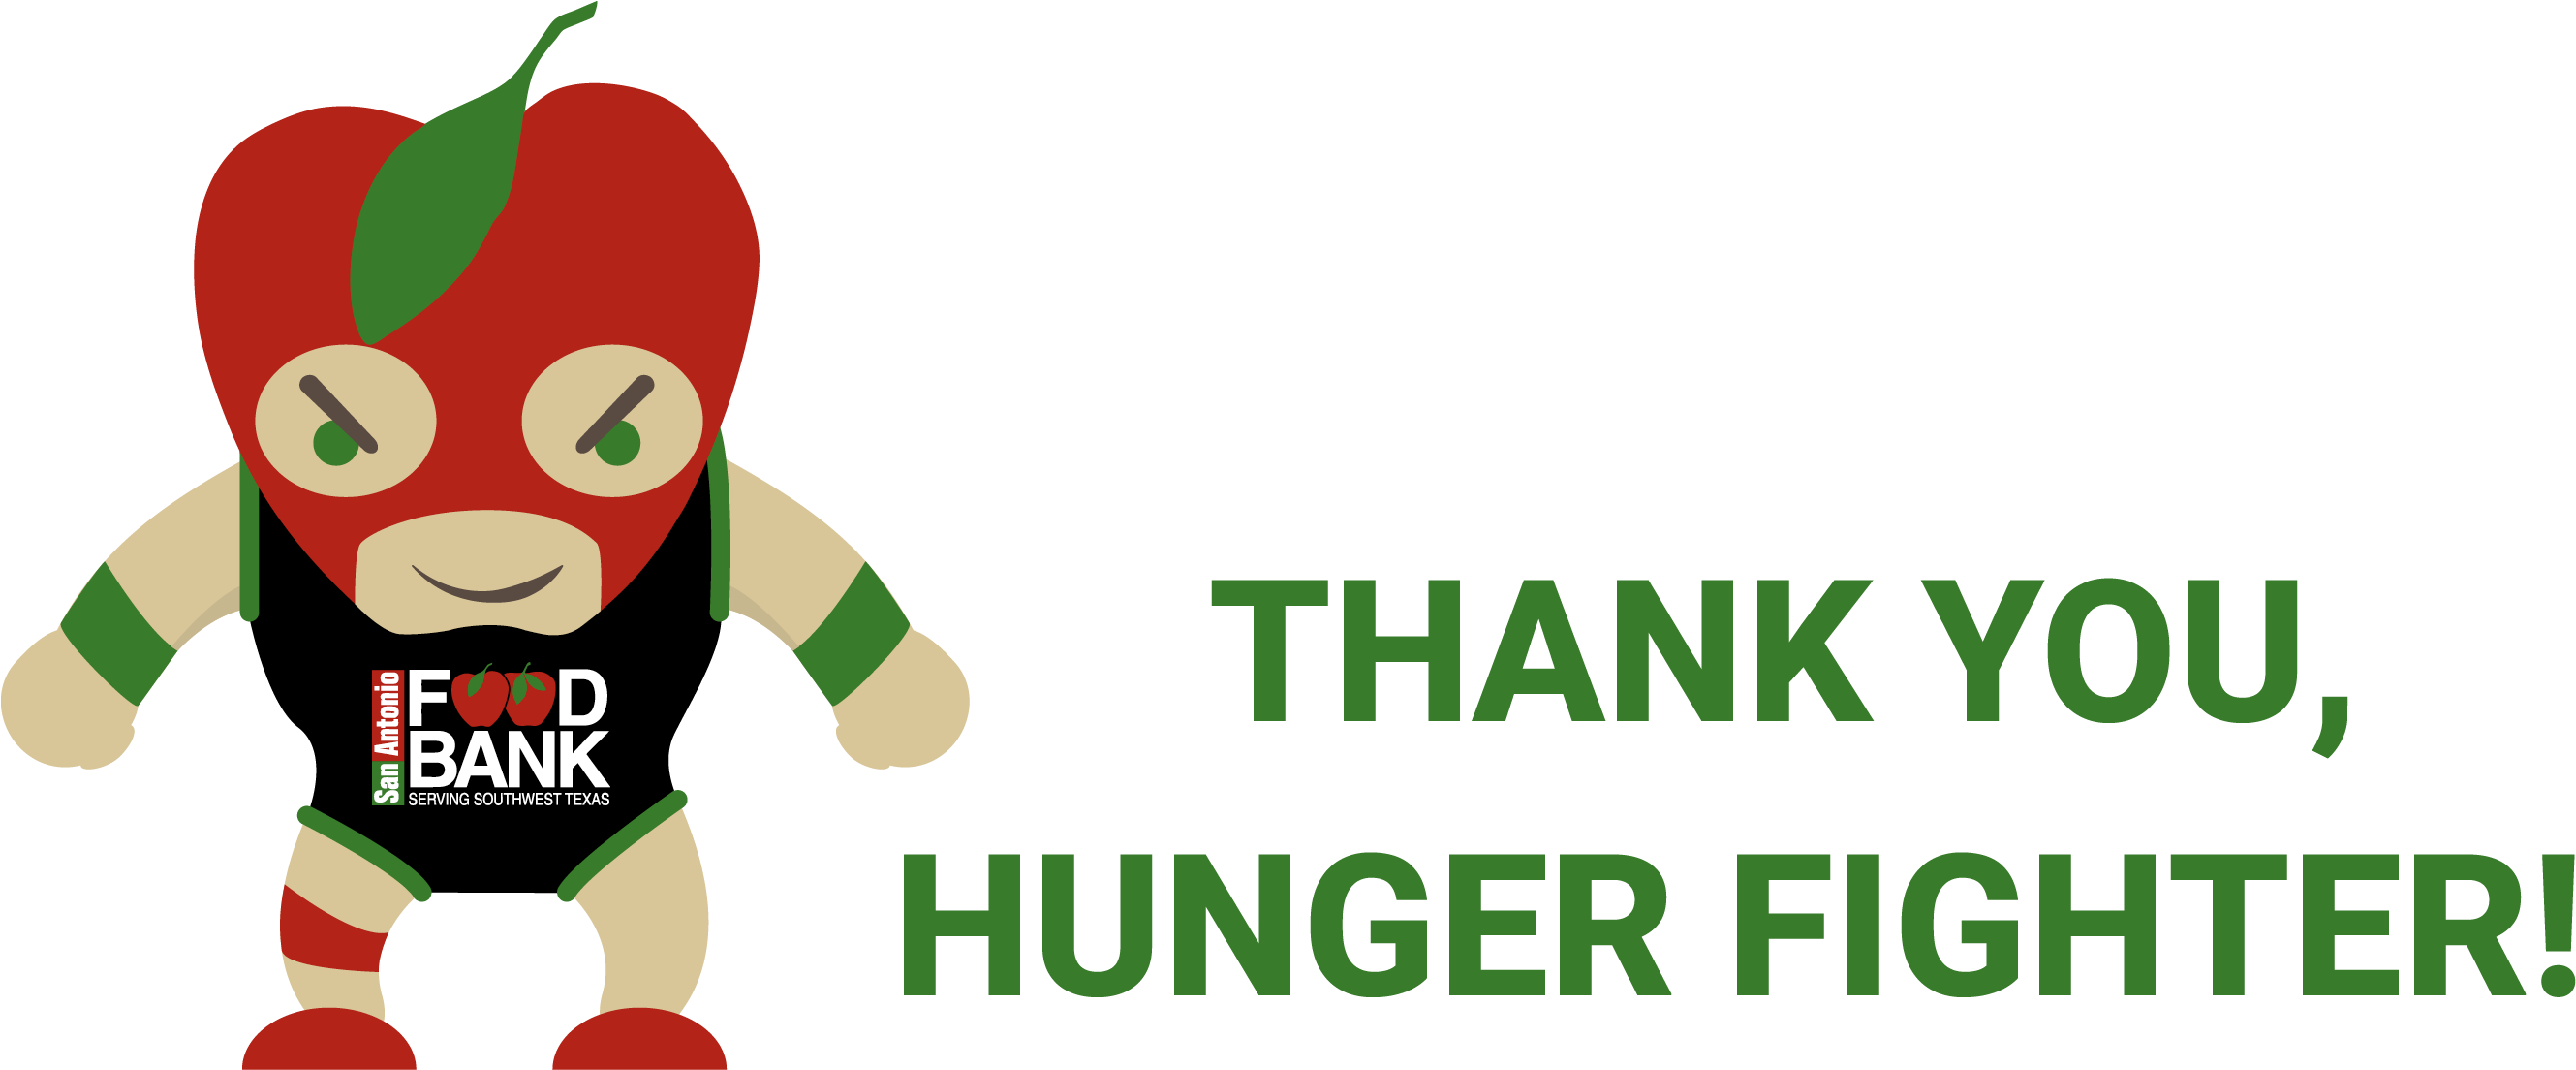 Donation Confirmation - San Antonio Food Bank Hunger Fighter (2667x1167)